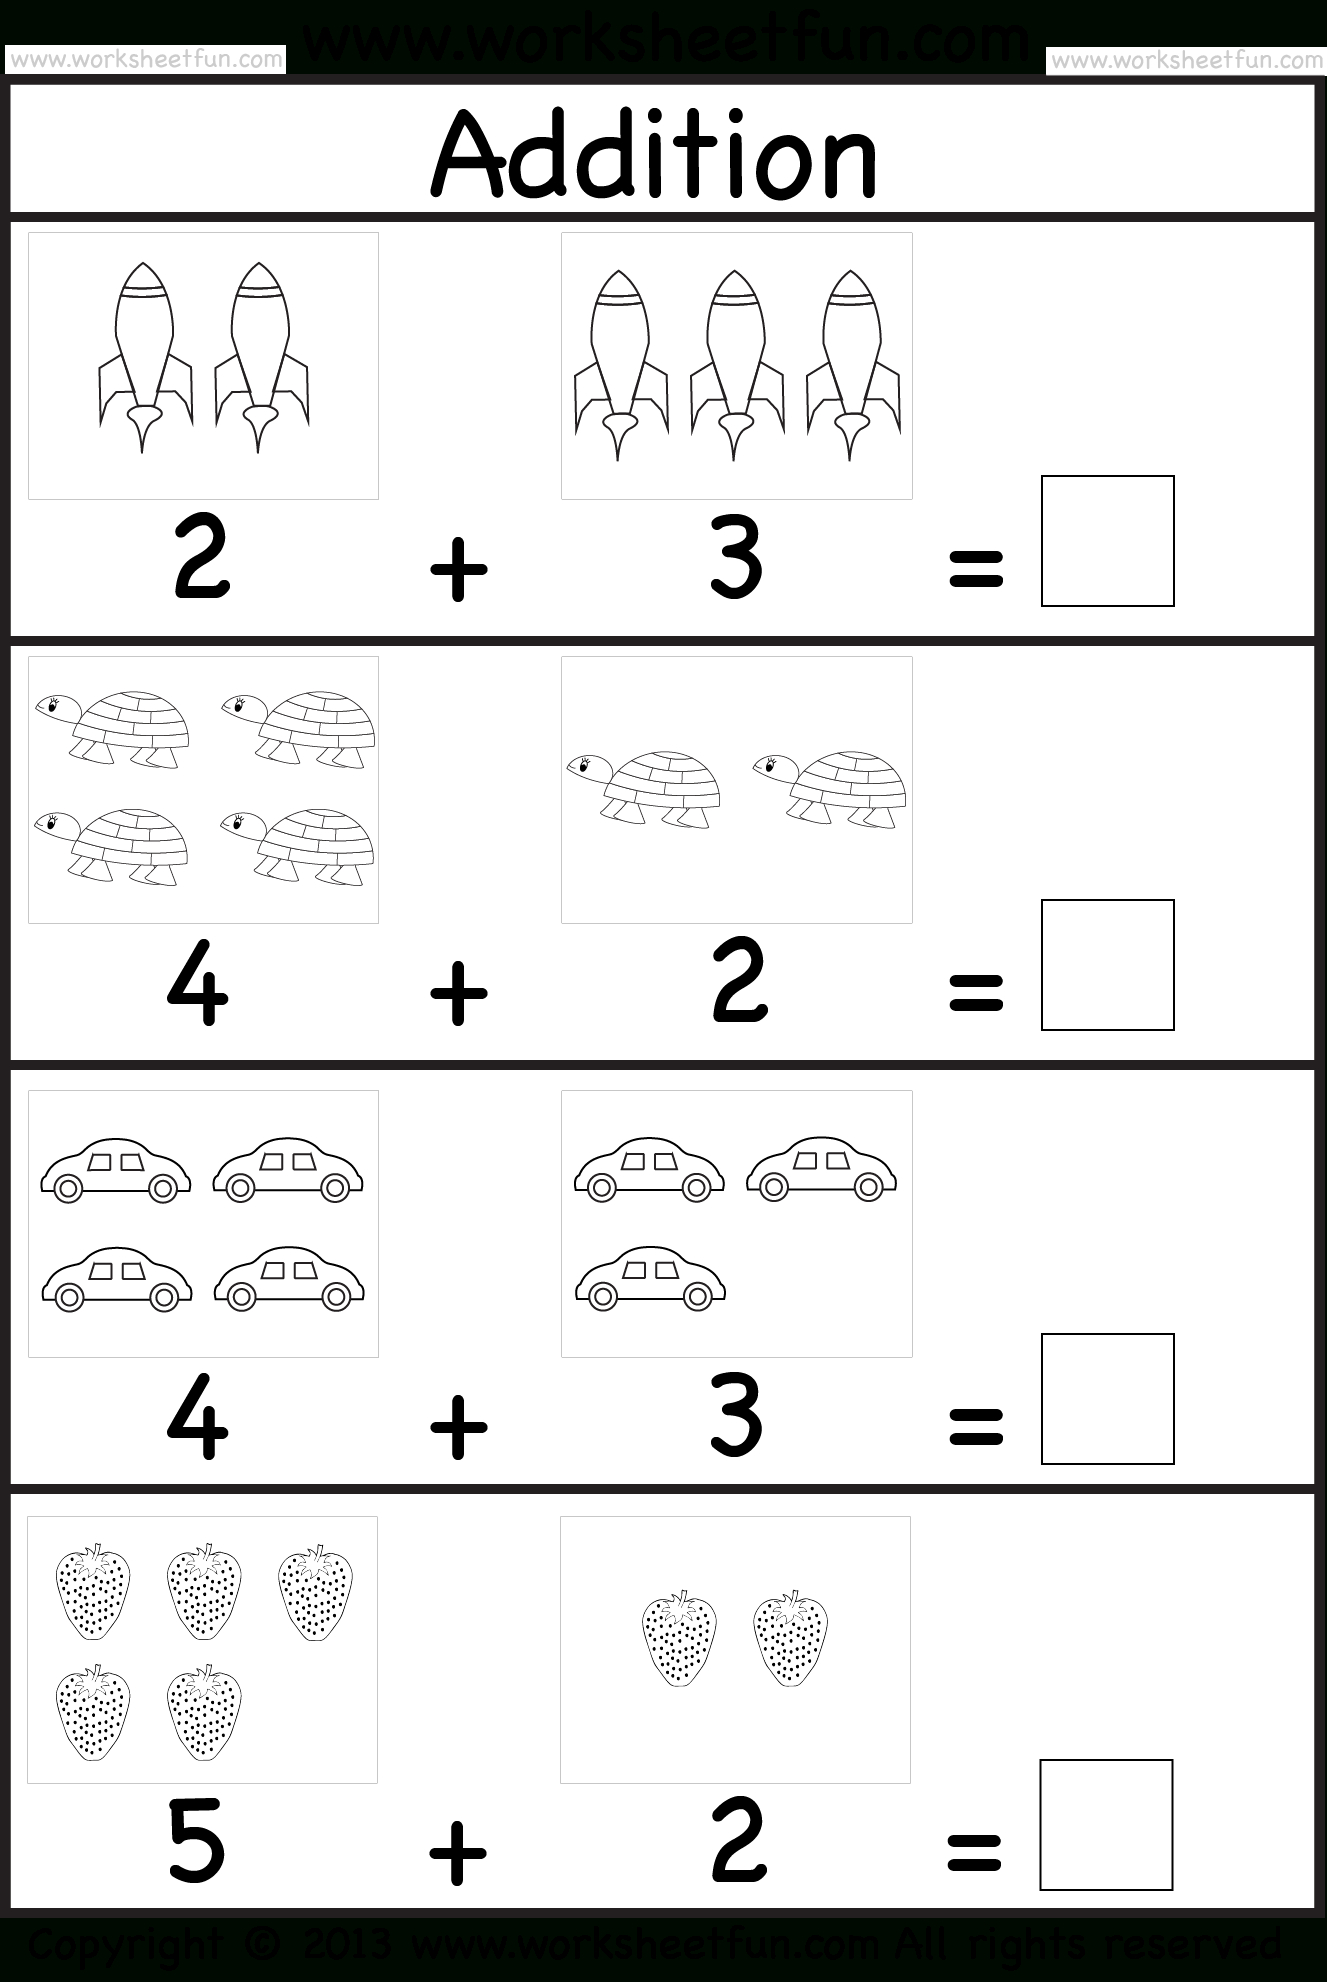 Addition Worksheet. This Site Has Great Free Worksheets For | Printable Worksheets For 5 Year Olds